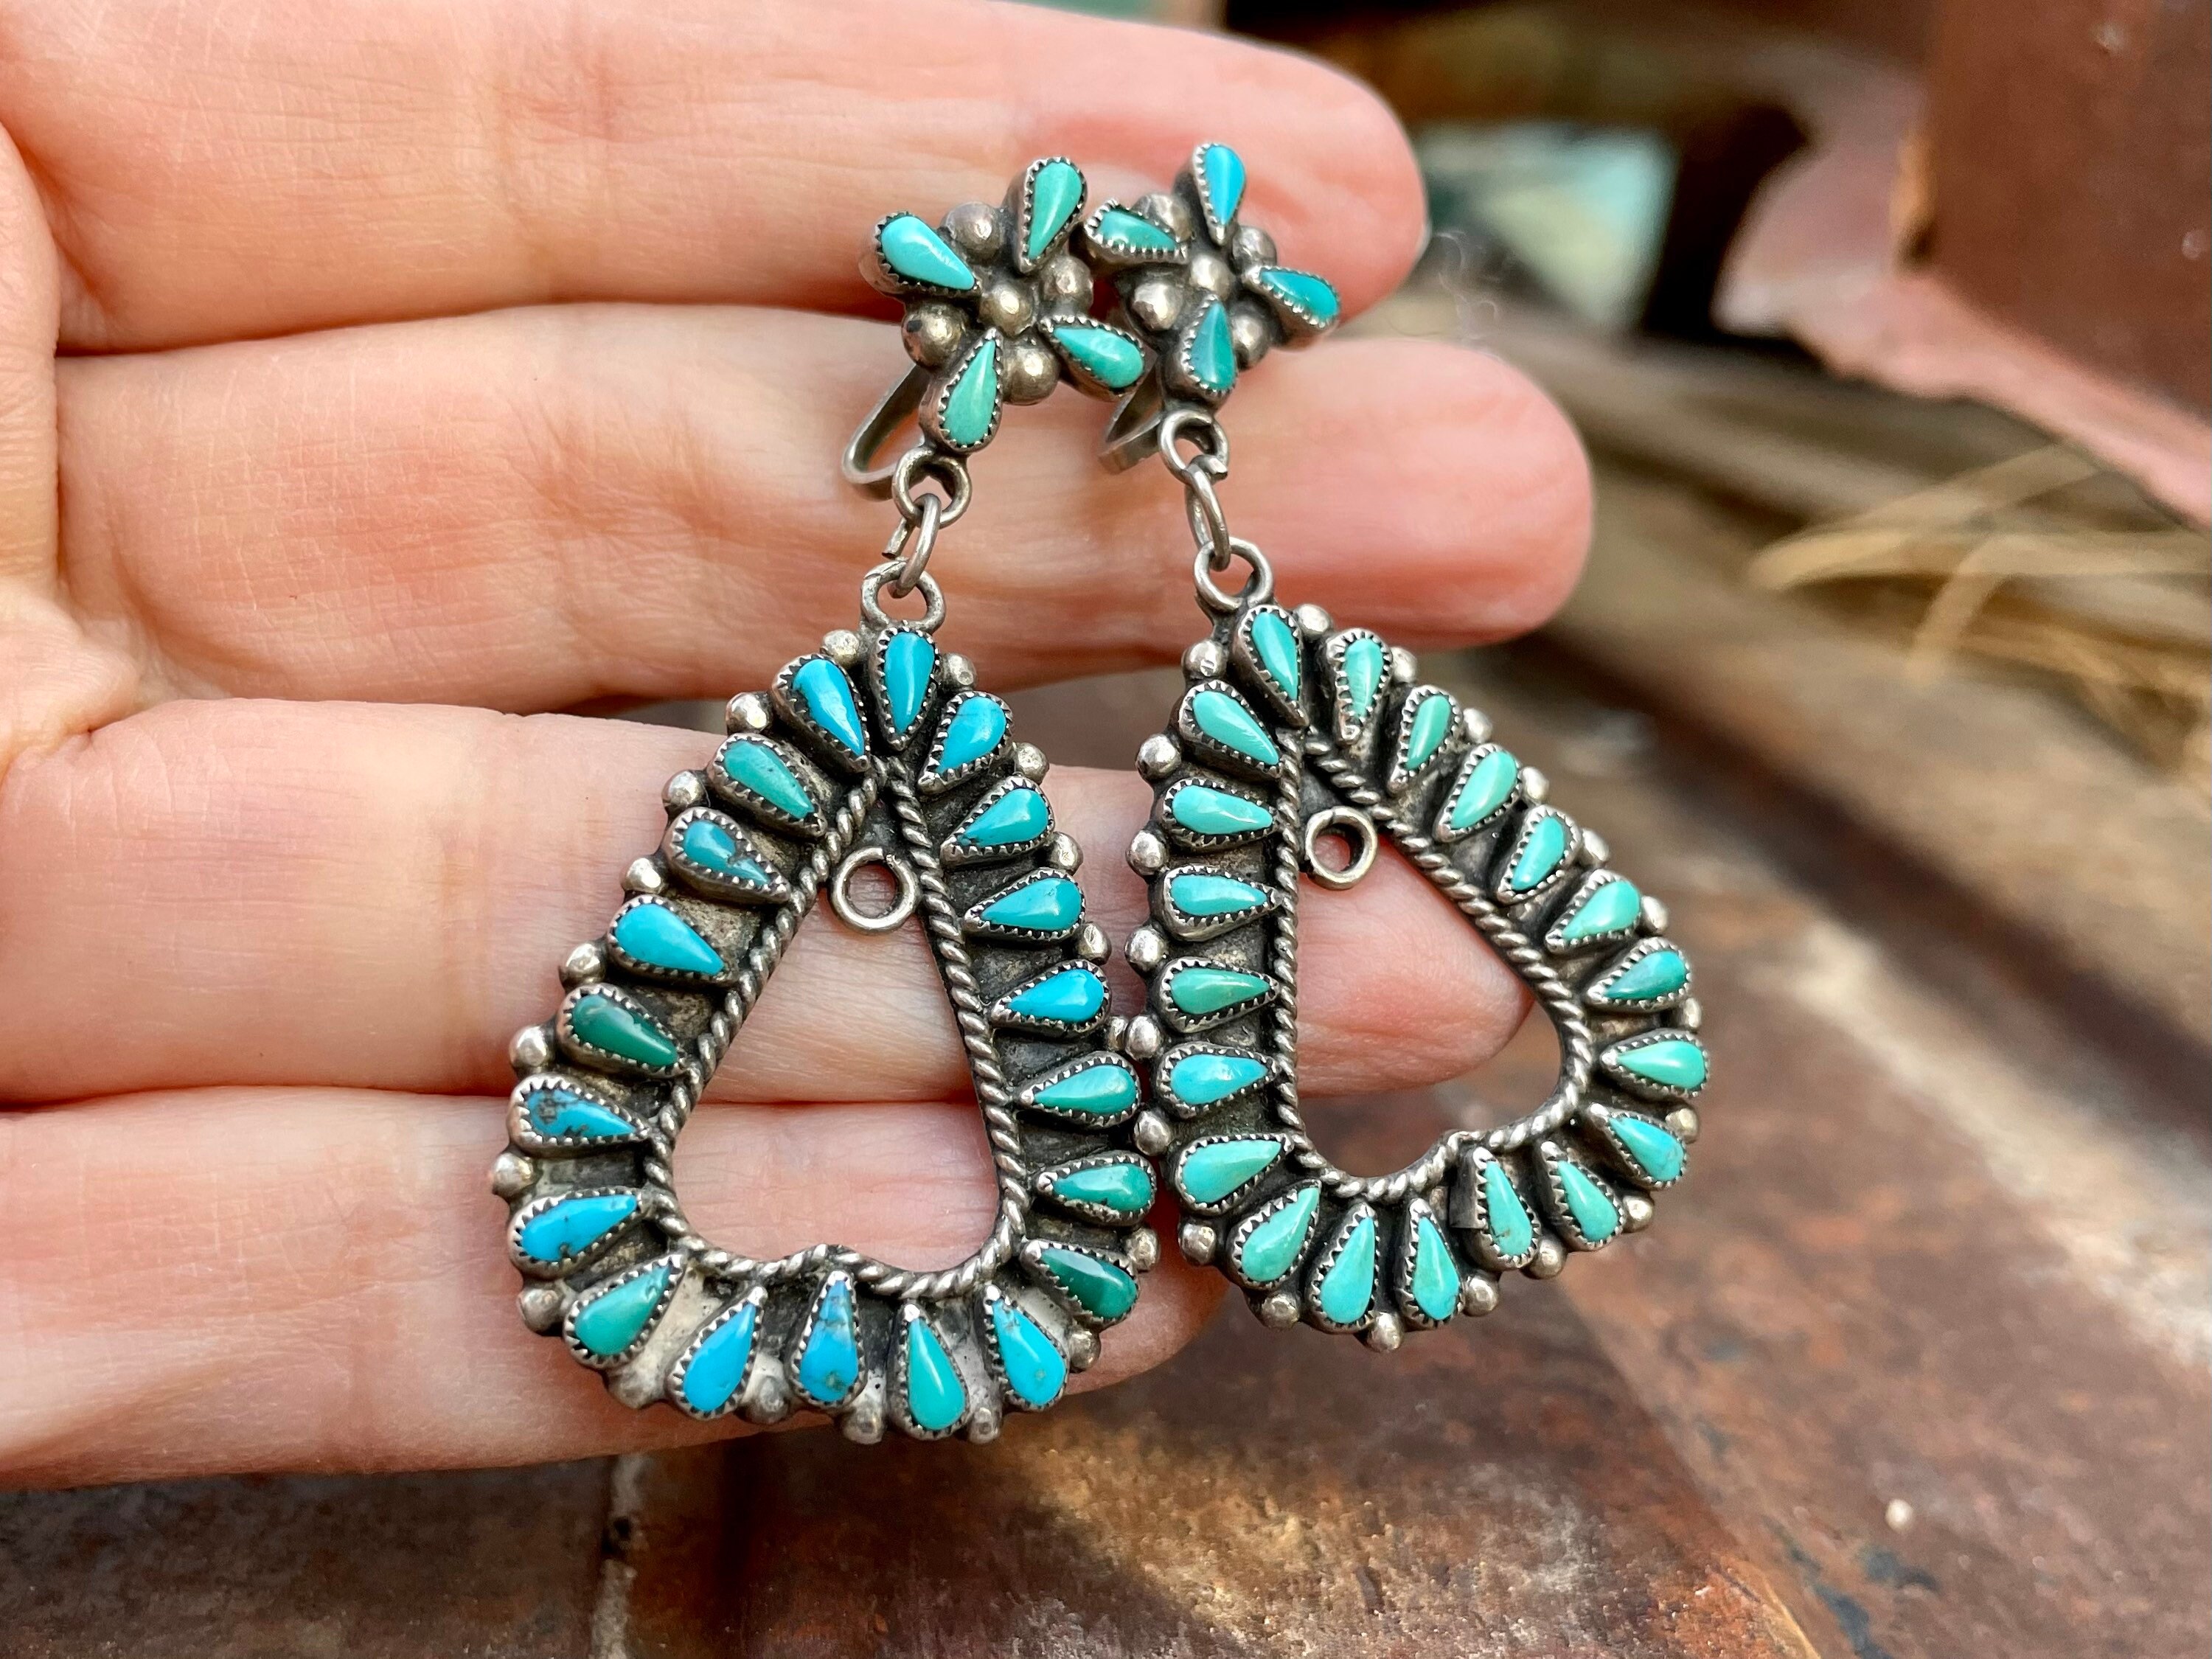 2 1940s Zuni Screw Back Earrings of Turquoise and Coral In